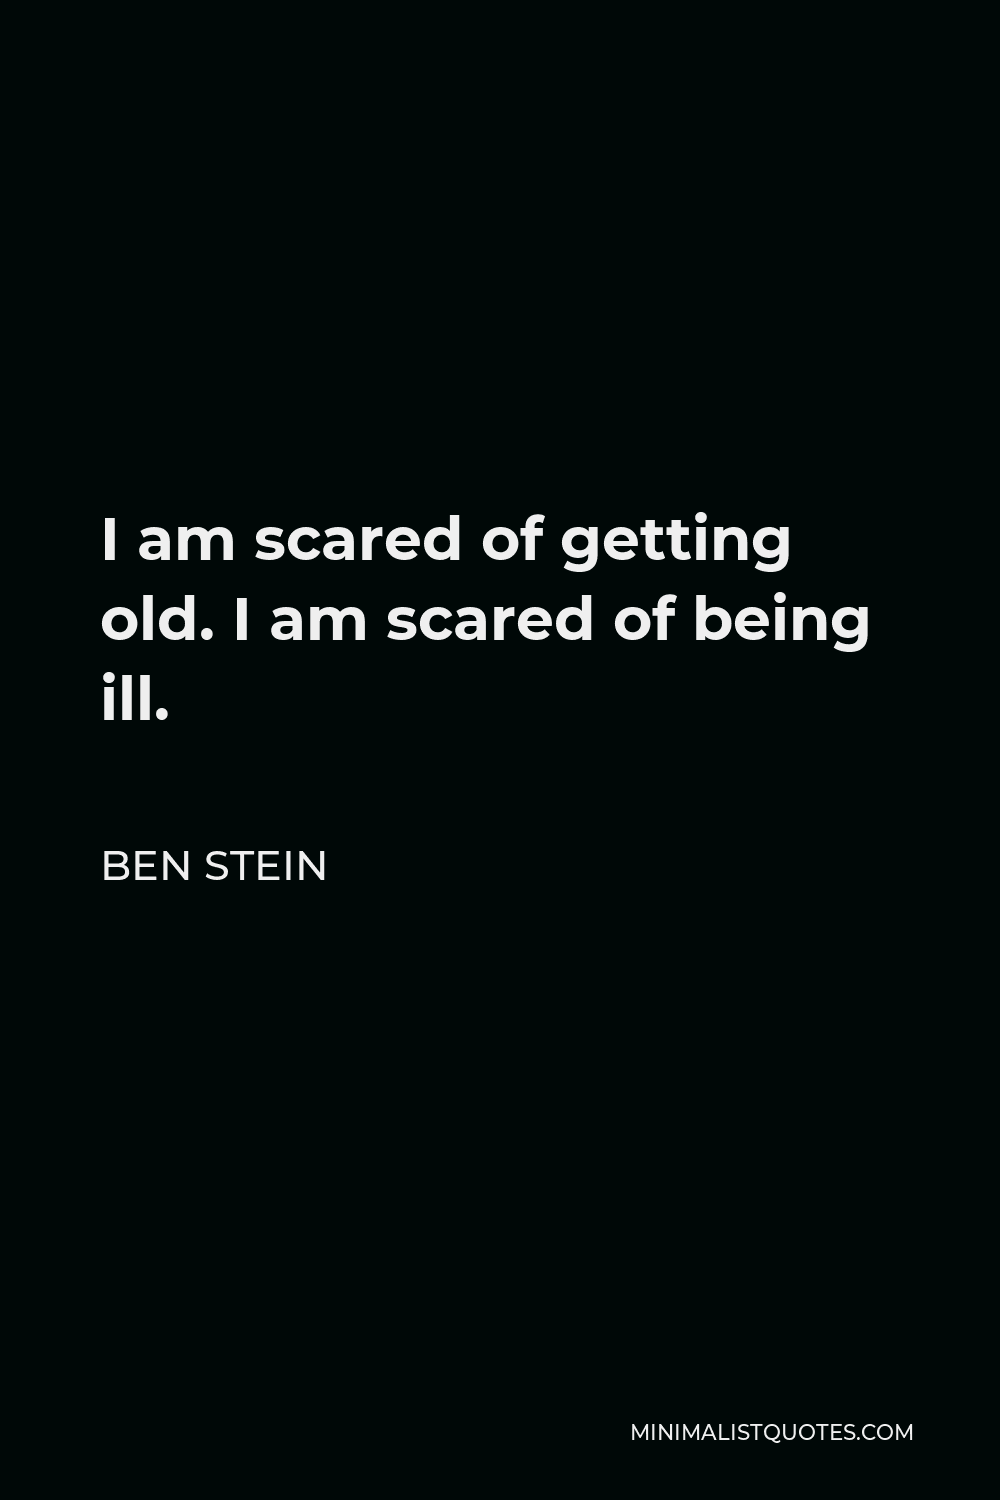 Ben Stein Quote - I am scared of getting old. I am scared of being ill.